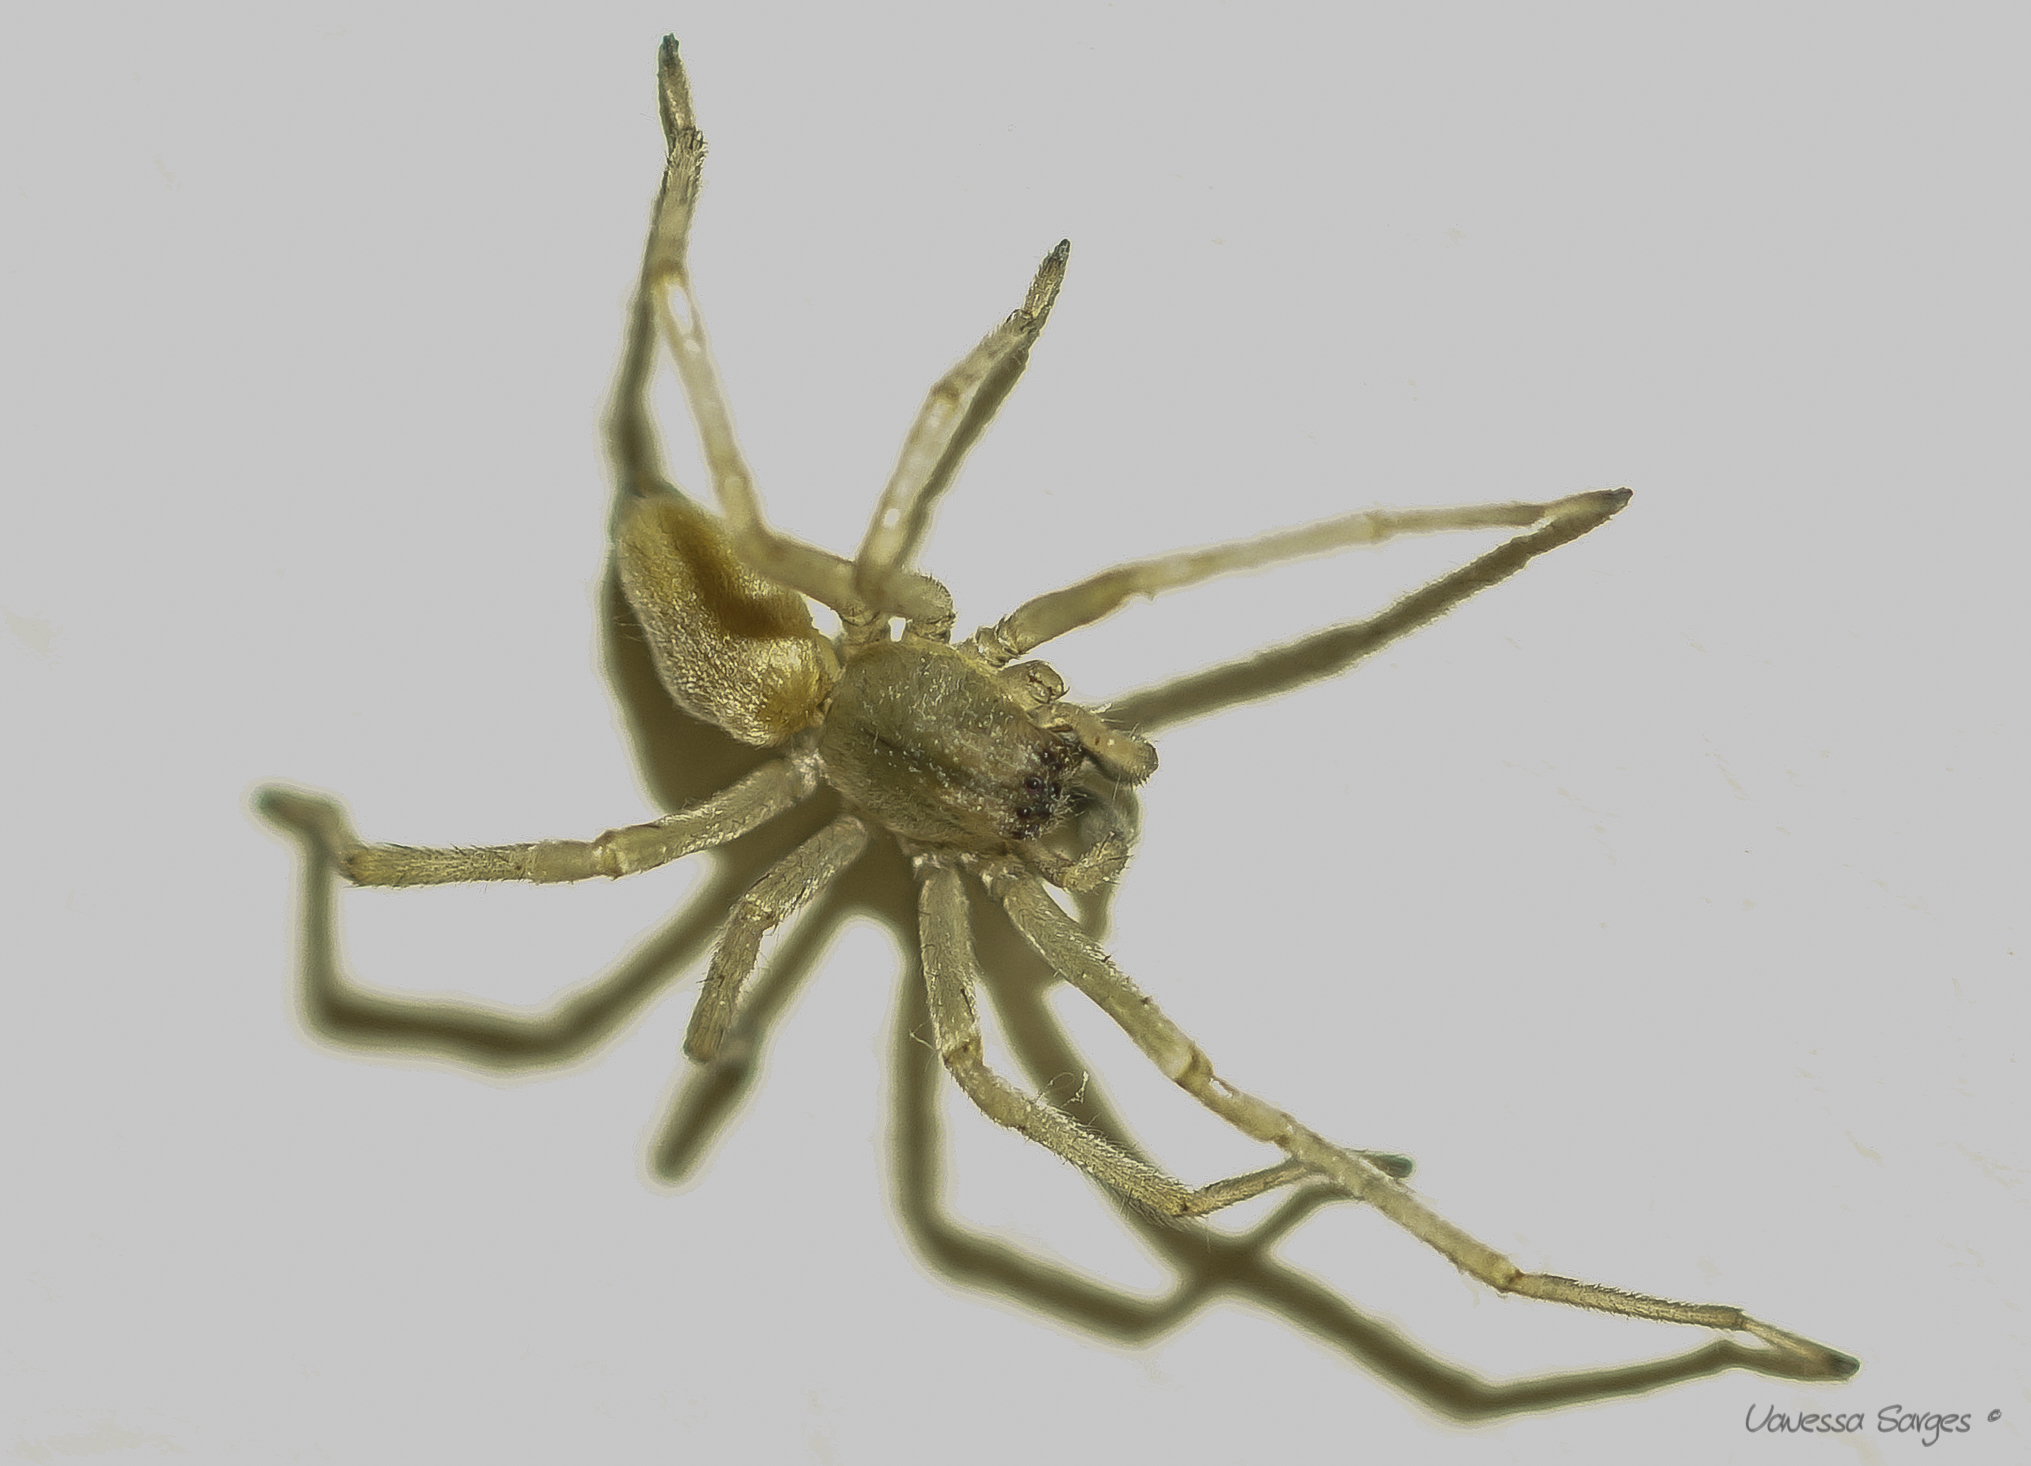 Cheiracanthium inclusum male missing front leg